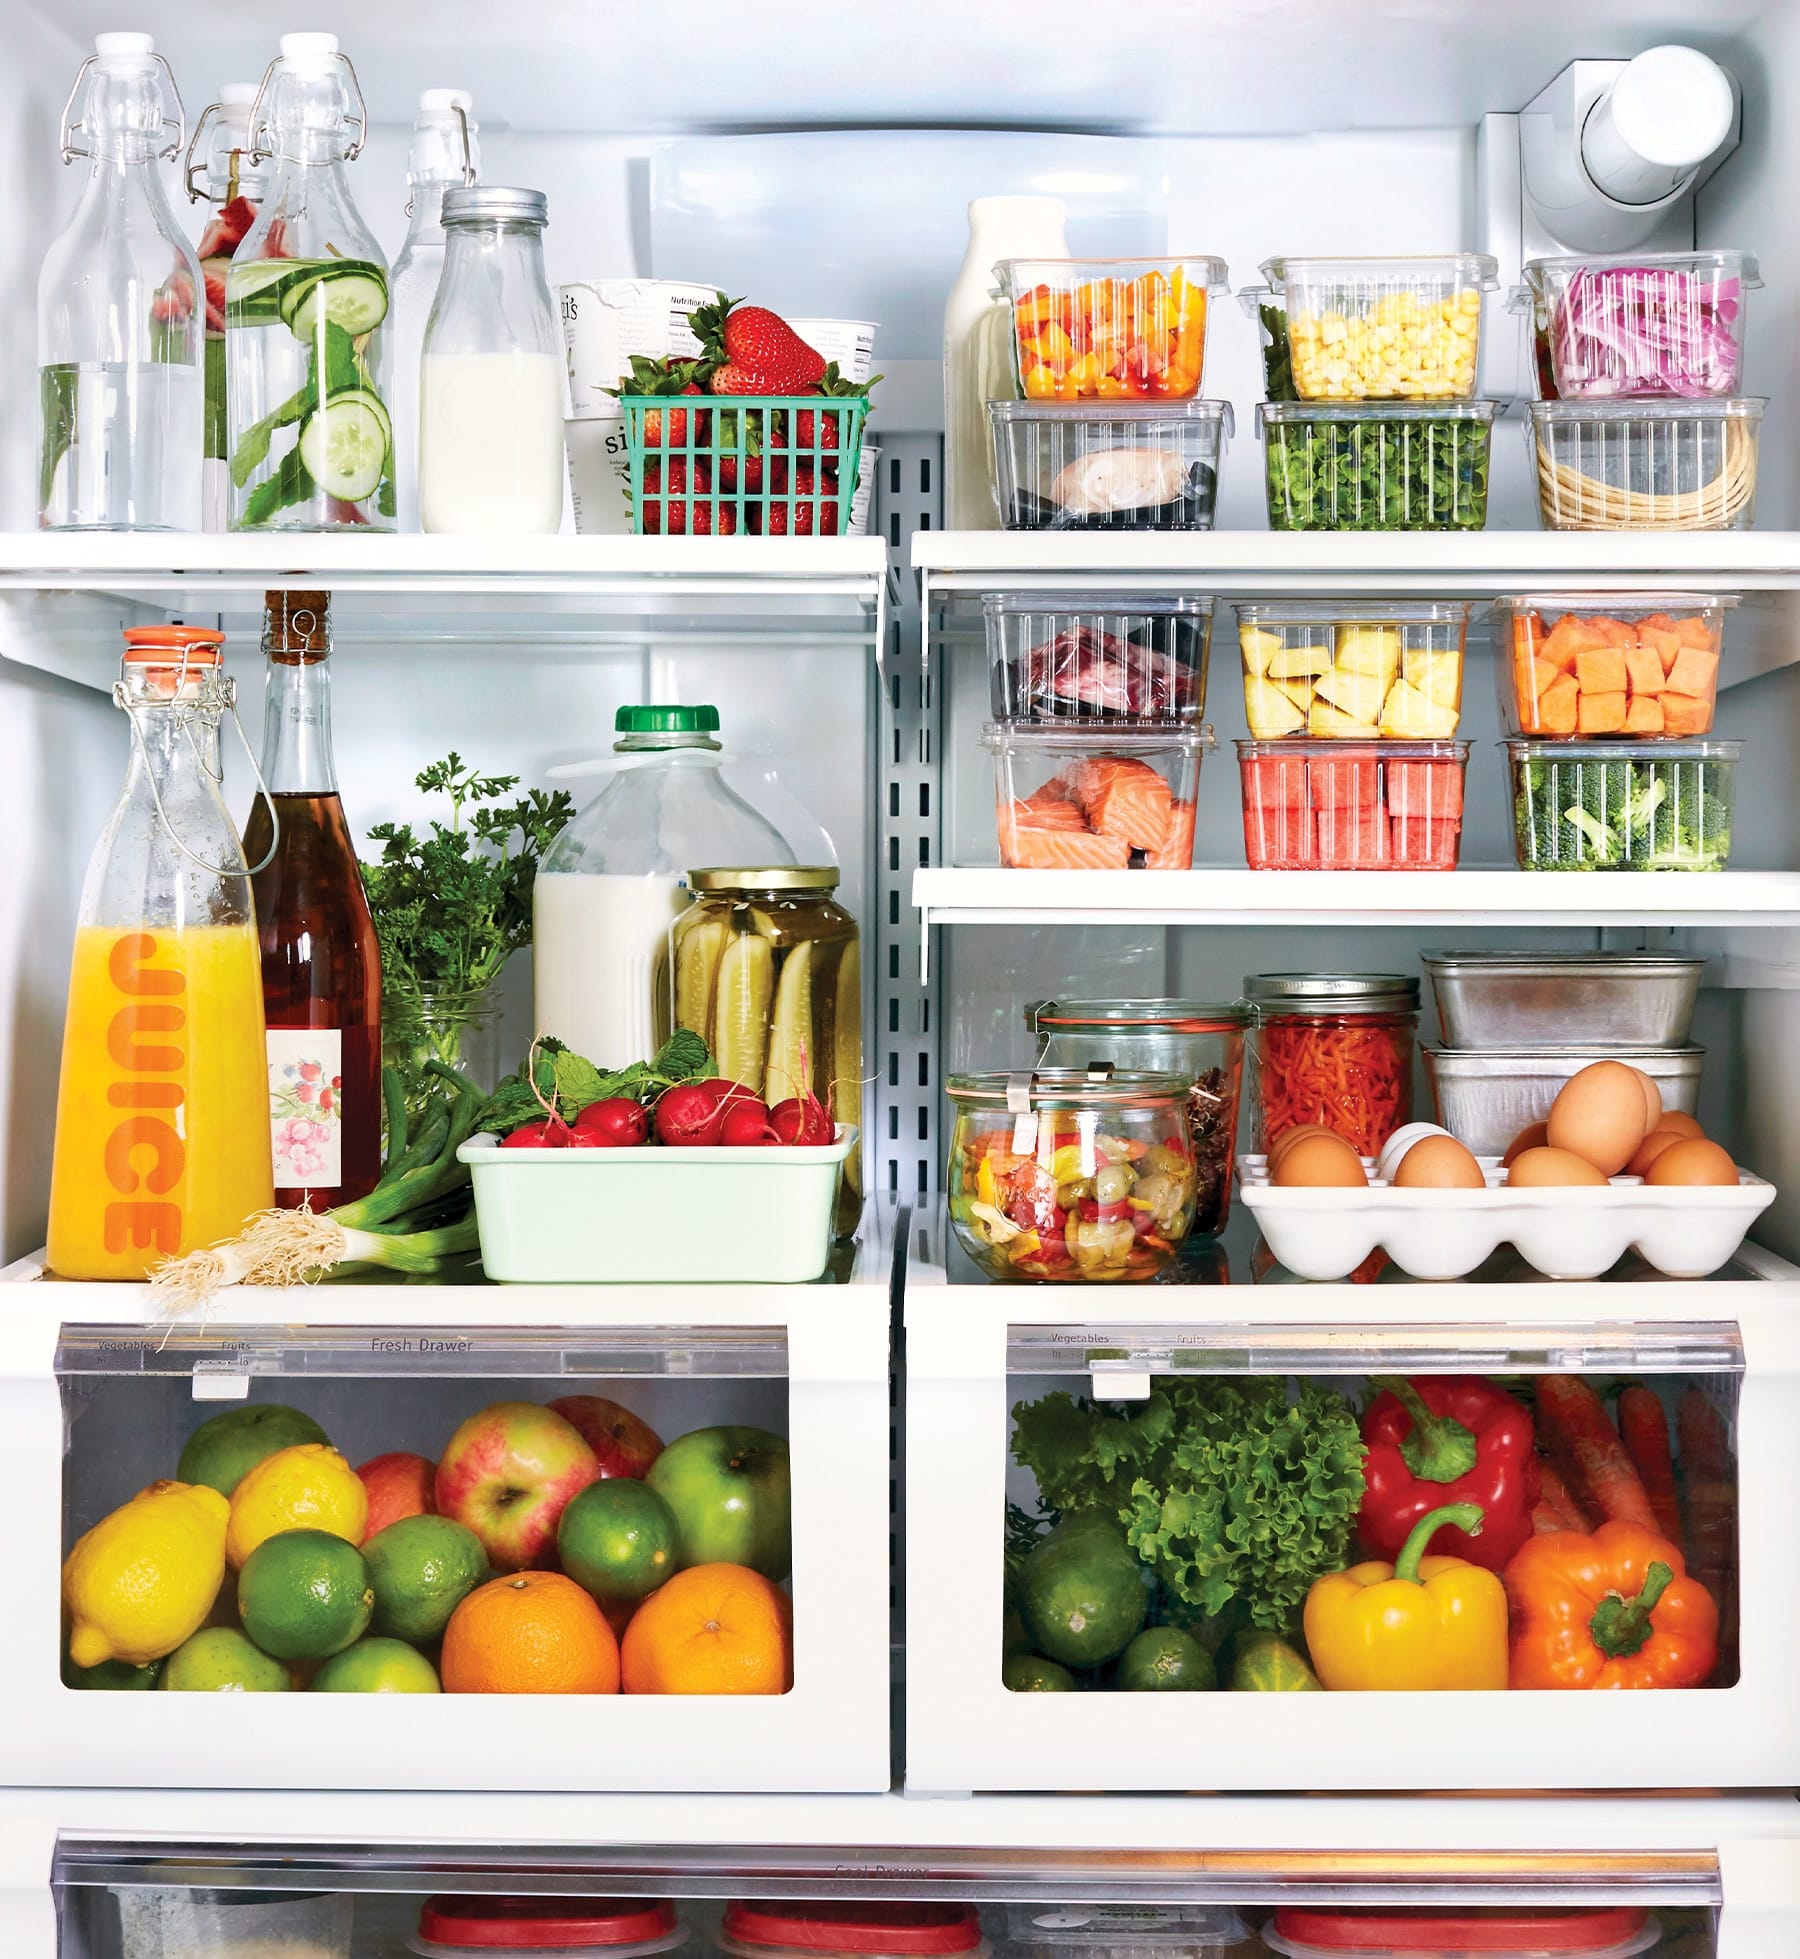 Taking too Long to Find Your Favourite Food? Best Fridge Organization